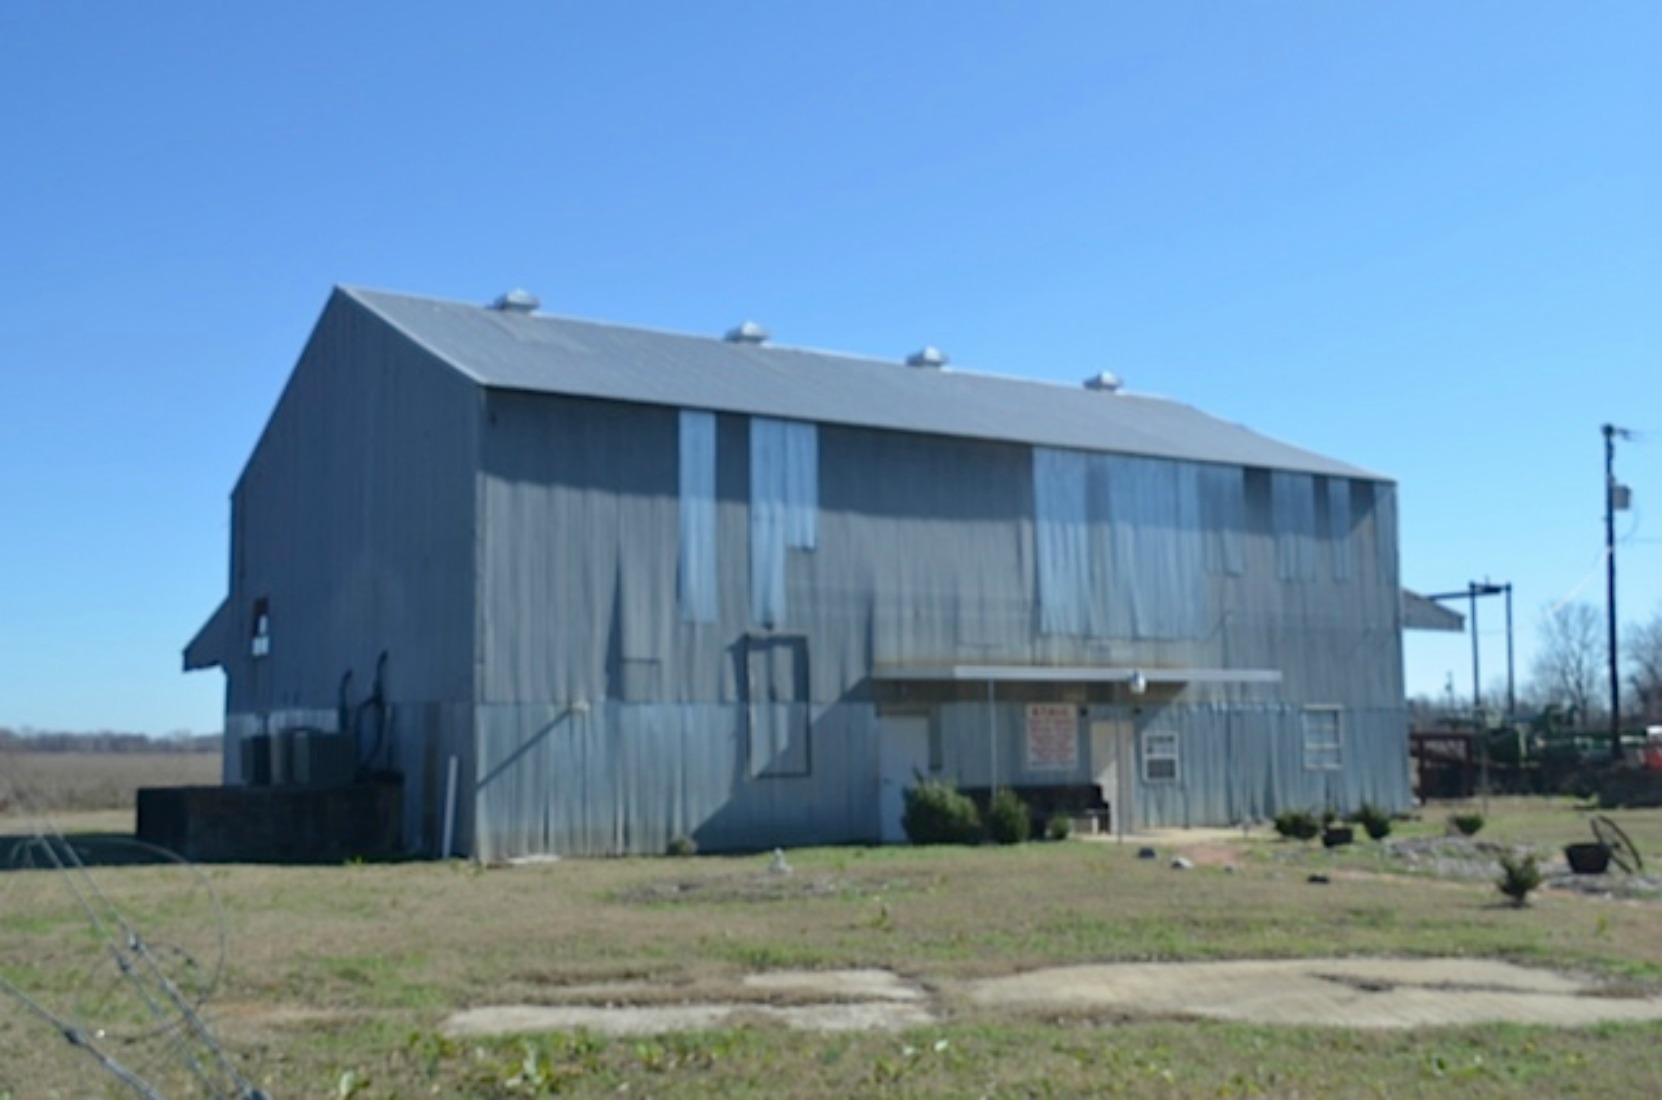 Glendora Gin building, now the site of the Emmett Till Historic Intrepid Centre, near the site of the former house of J.W. Milam, one of the two men who murdered Emmett Till in August 1955, Glendora, Mississippi (courtesy of Keith Petersen)